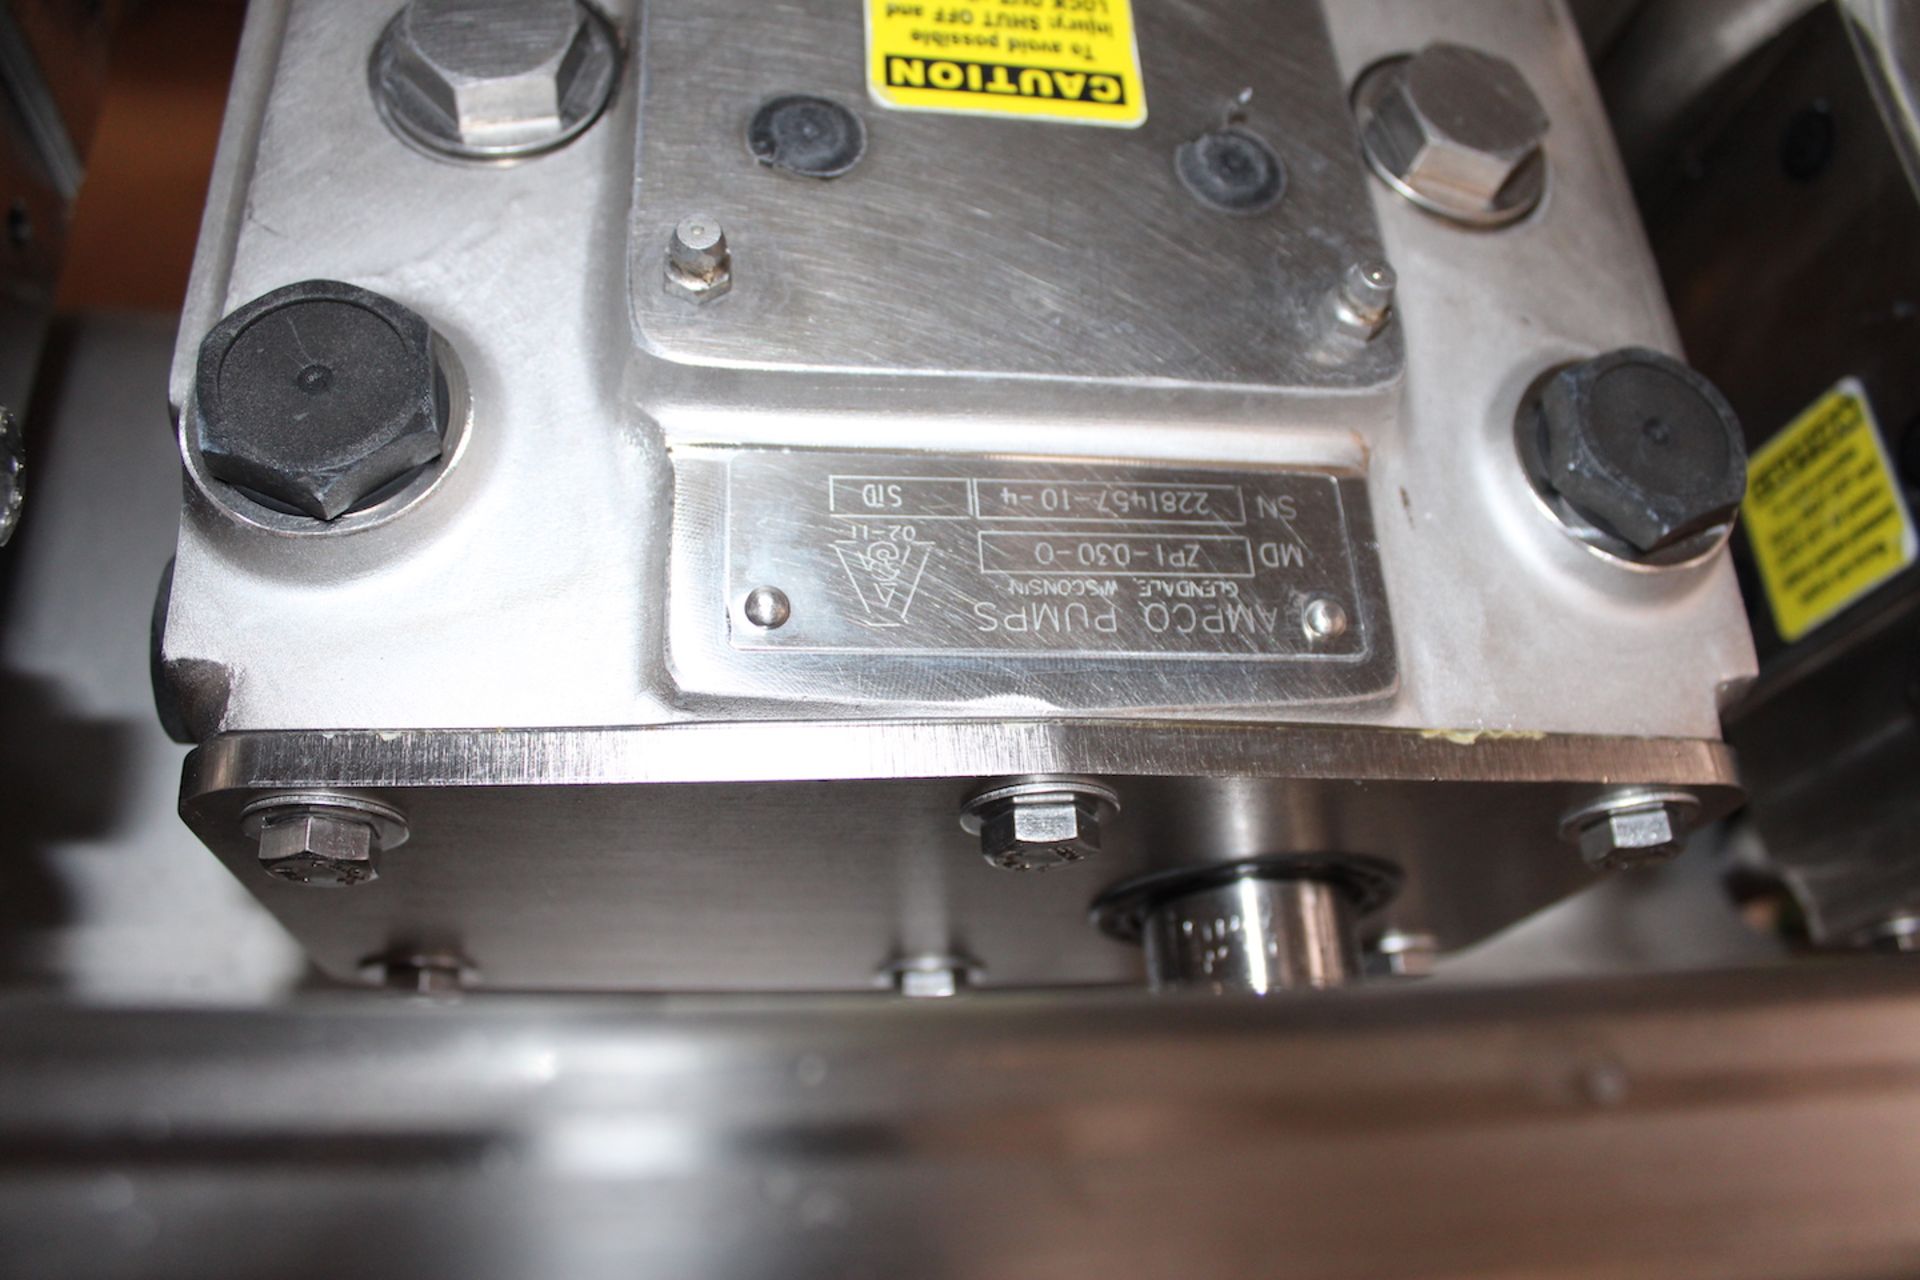 HINDS-BOCK 4-HEAD DEPOSITOR / FILLER, MODEL 4P-039, S/N 5698, WITH (4) AMPCO AND WCB POSITIVE - Image 8 of 13